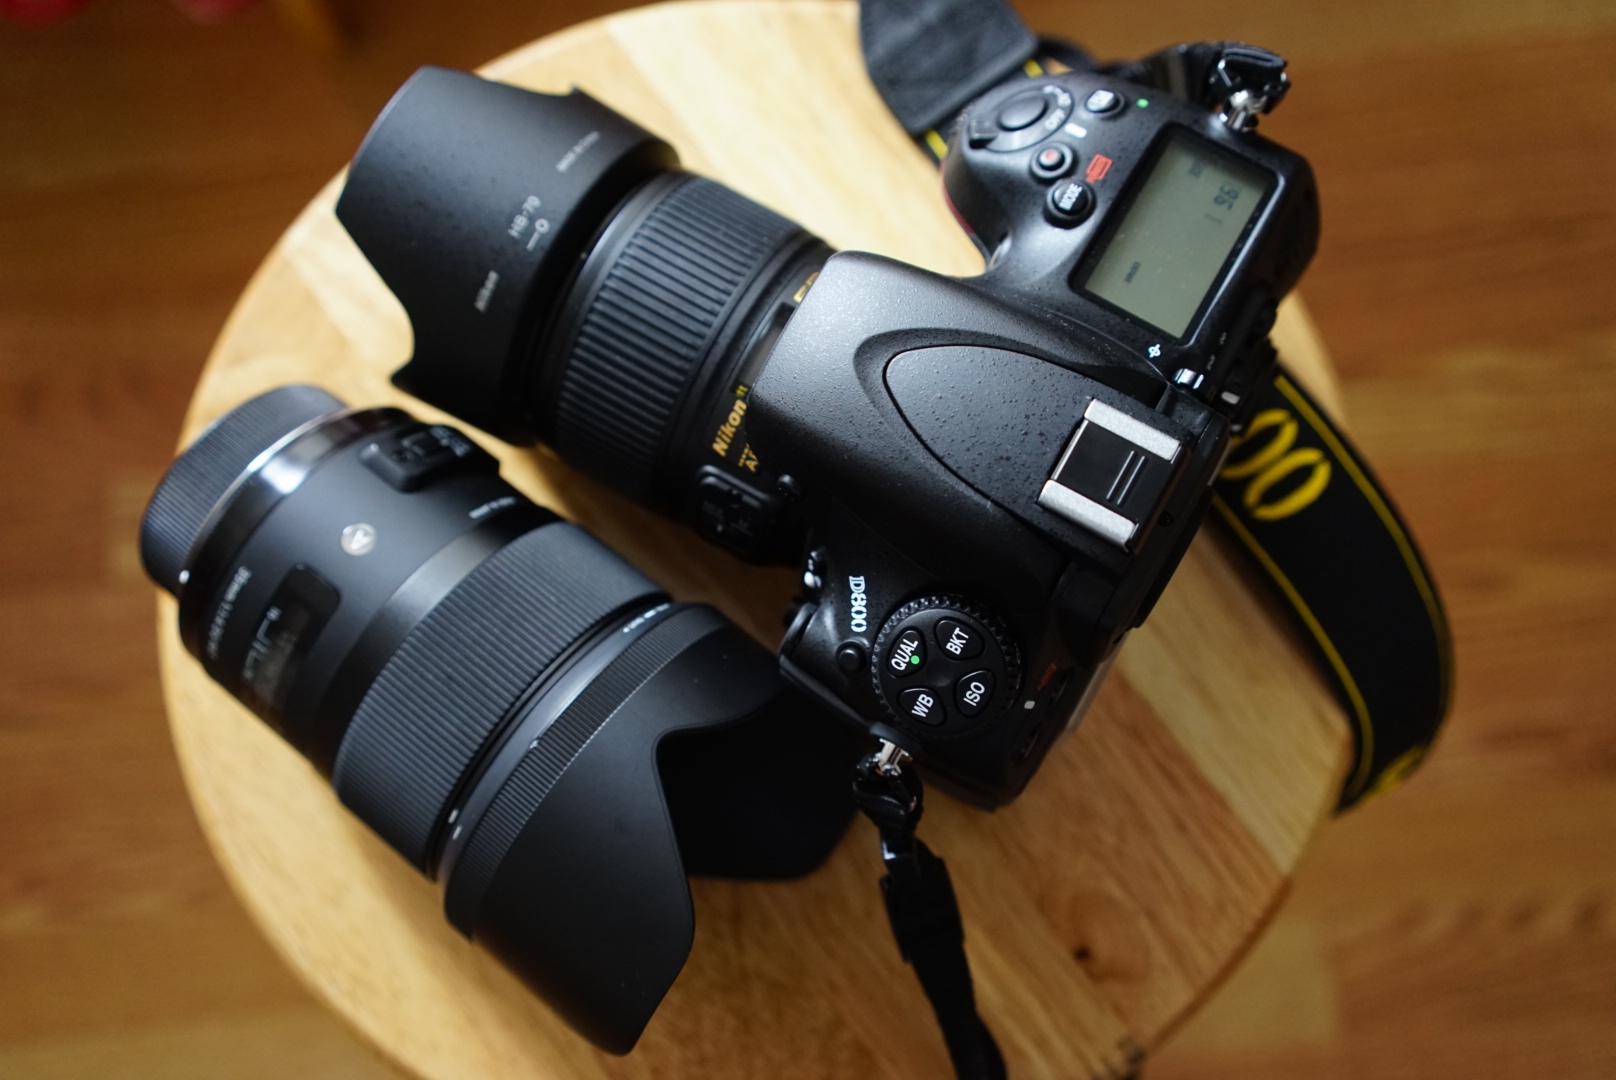 Which One? Sigma 35mm f1.4 or Nikon 35mm f1.8 G?